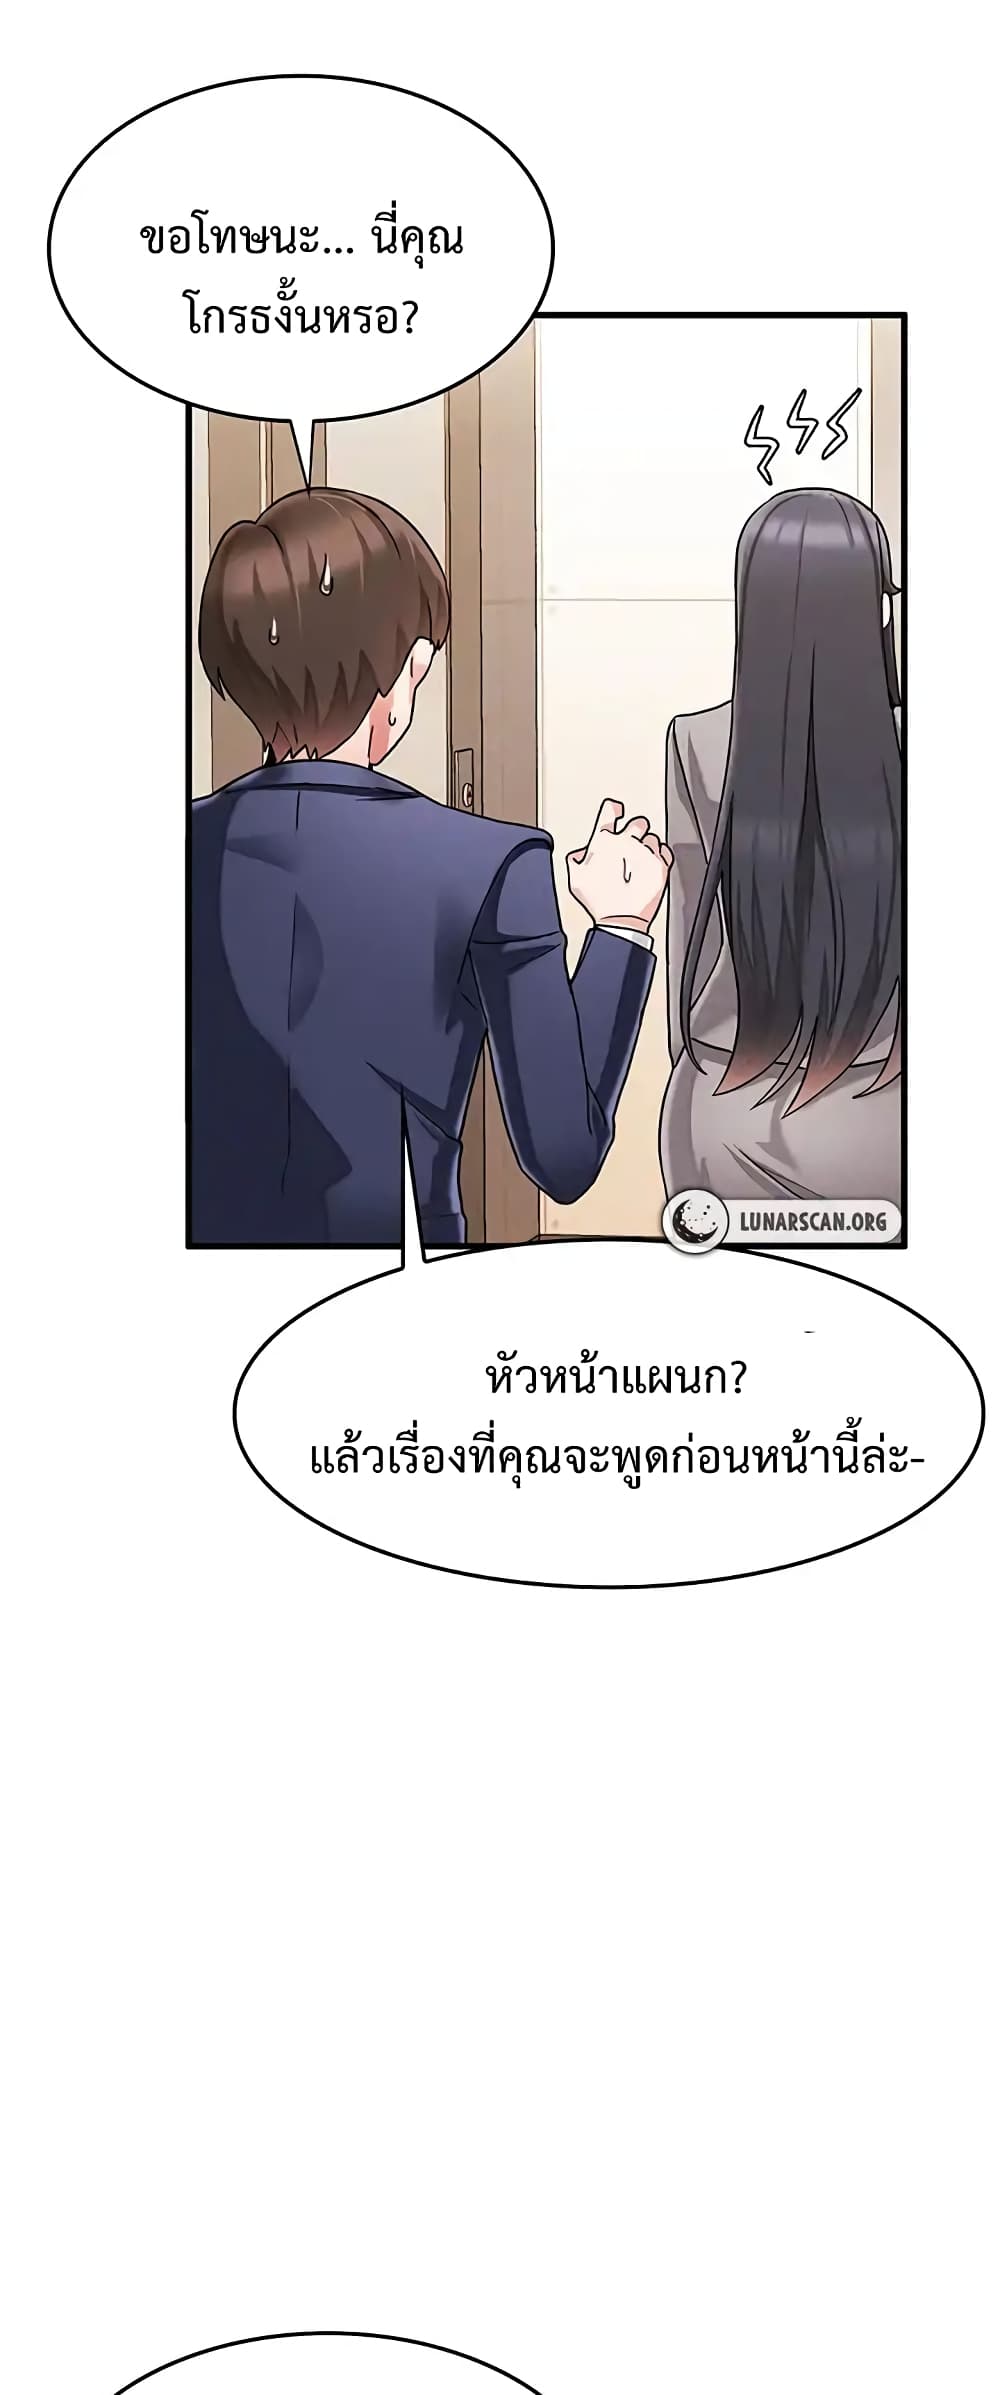 Relationship Reverse Button: Let’s Make Her Submissive 1 ภาพที่ 26